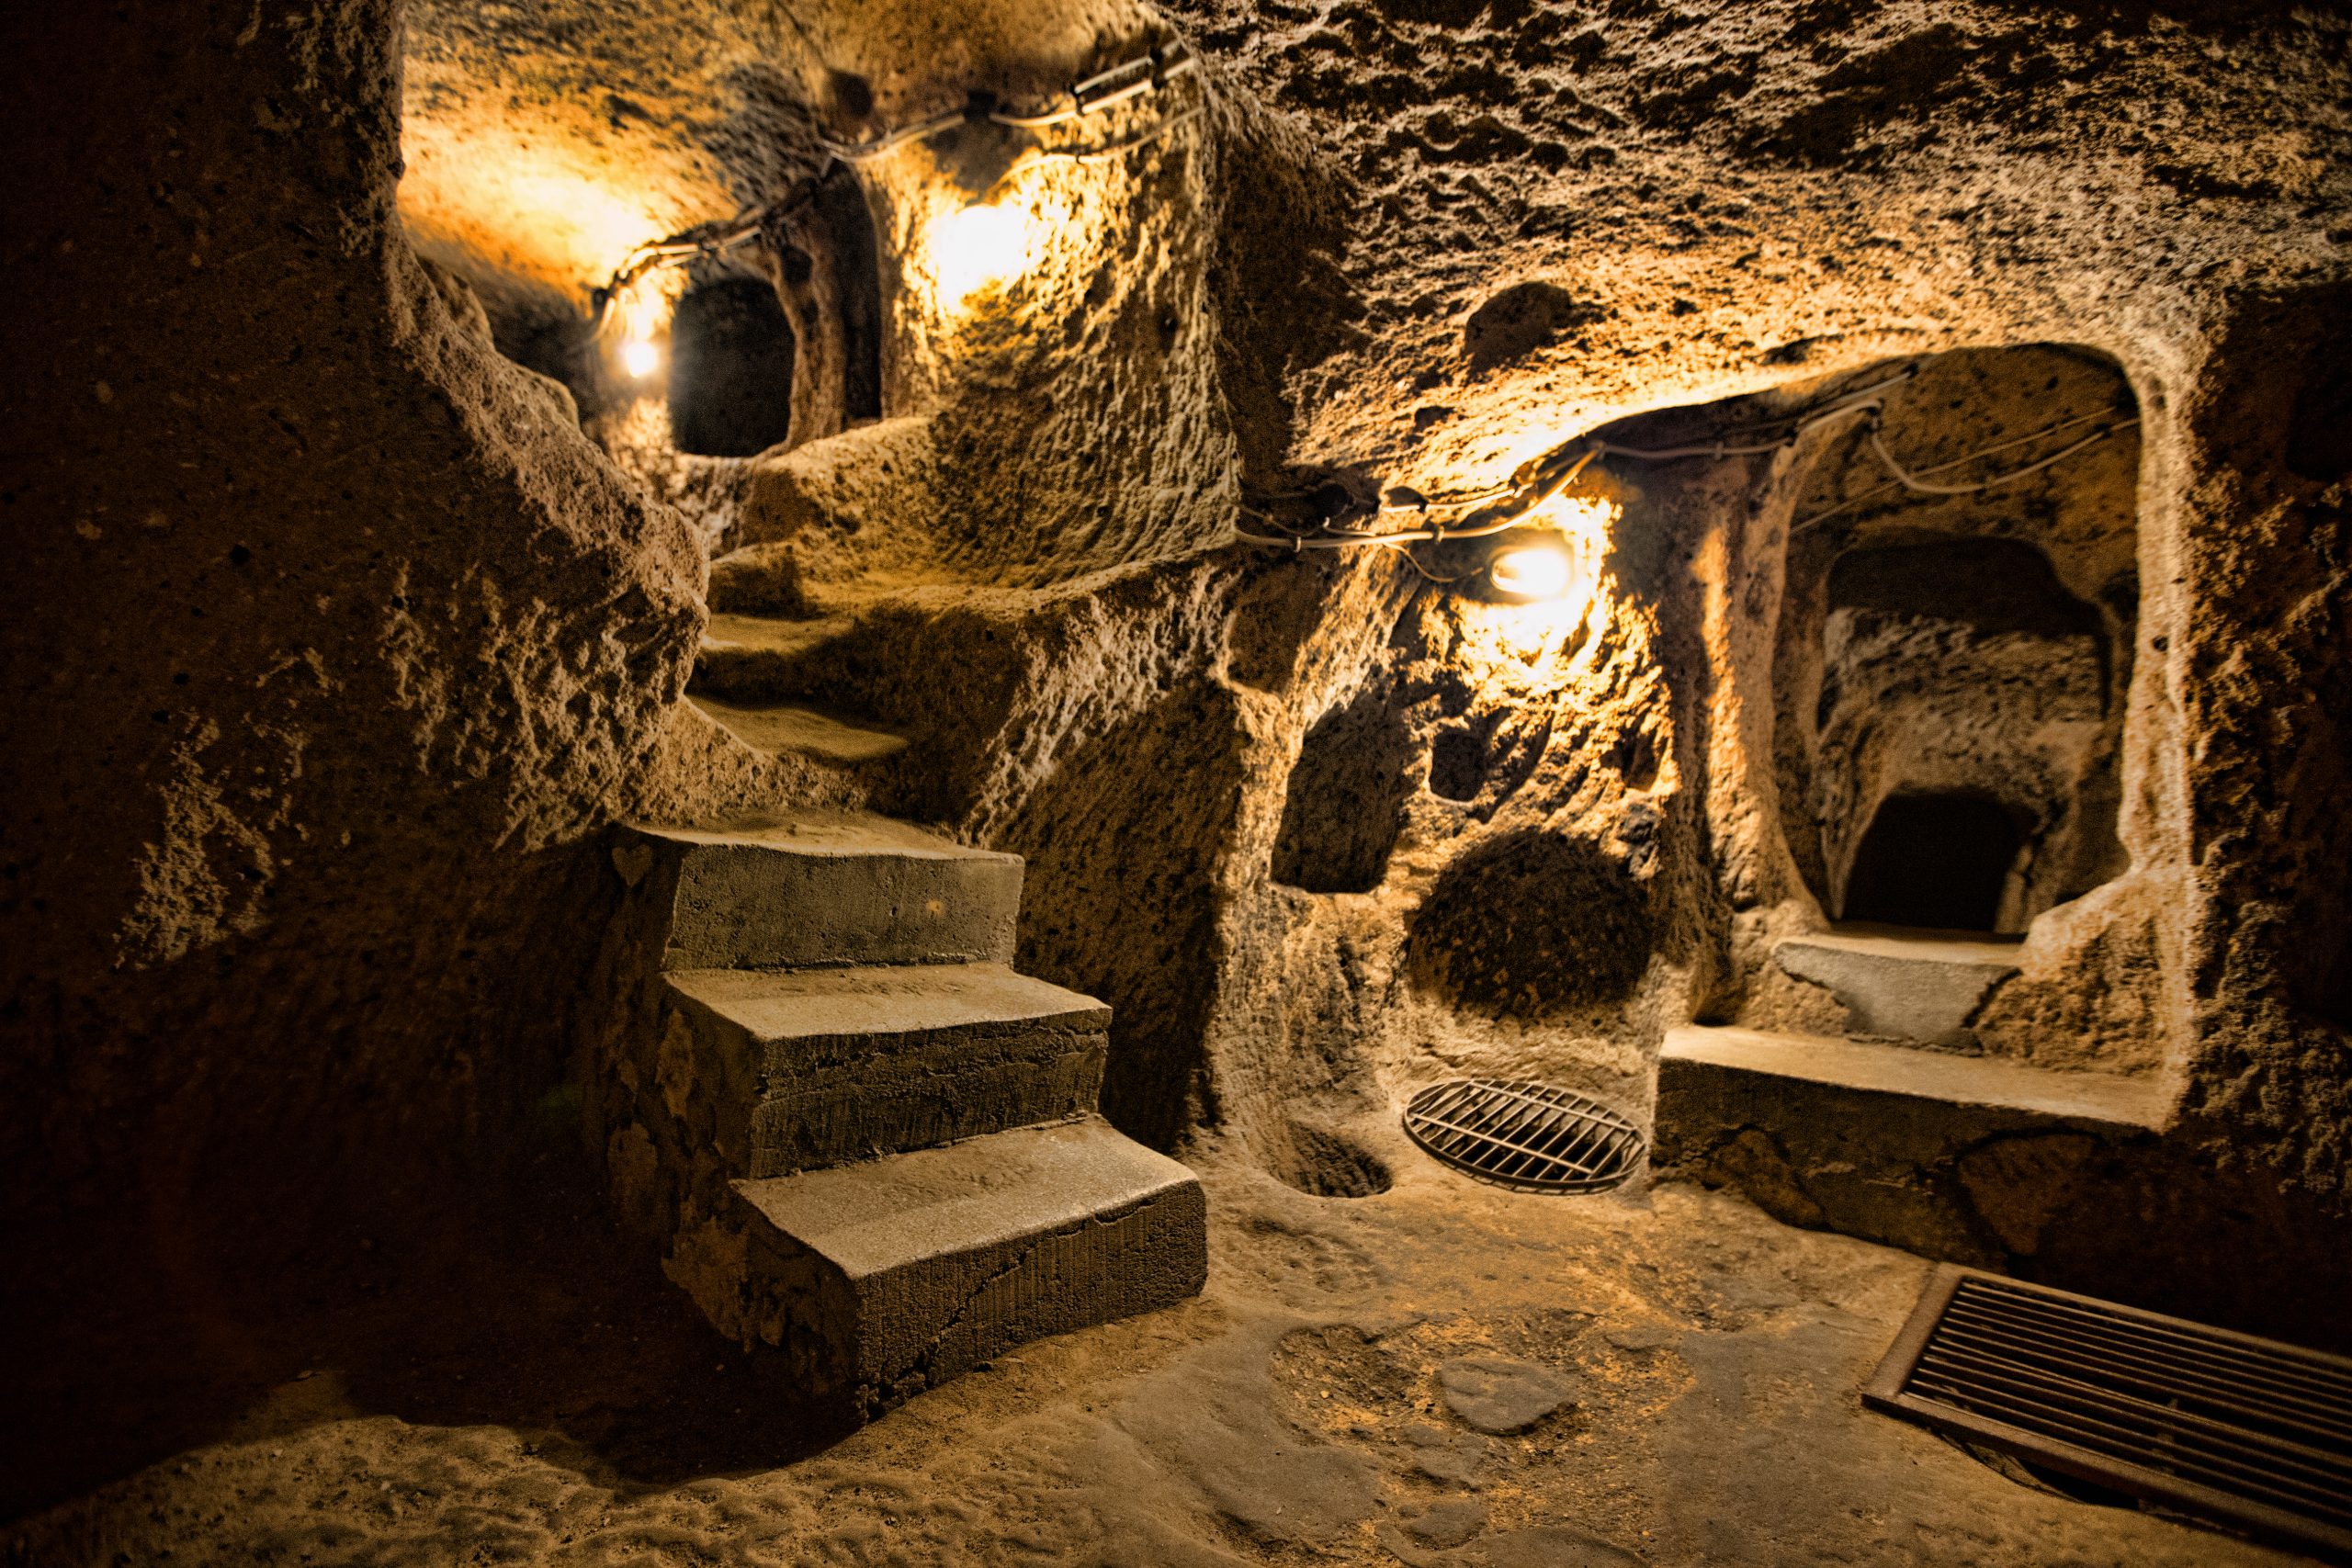 A section of the underground city with stairs leading into a hallway. Depositphotos.